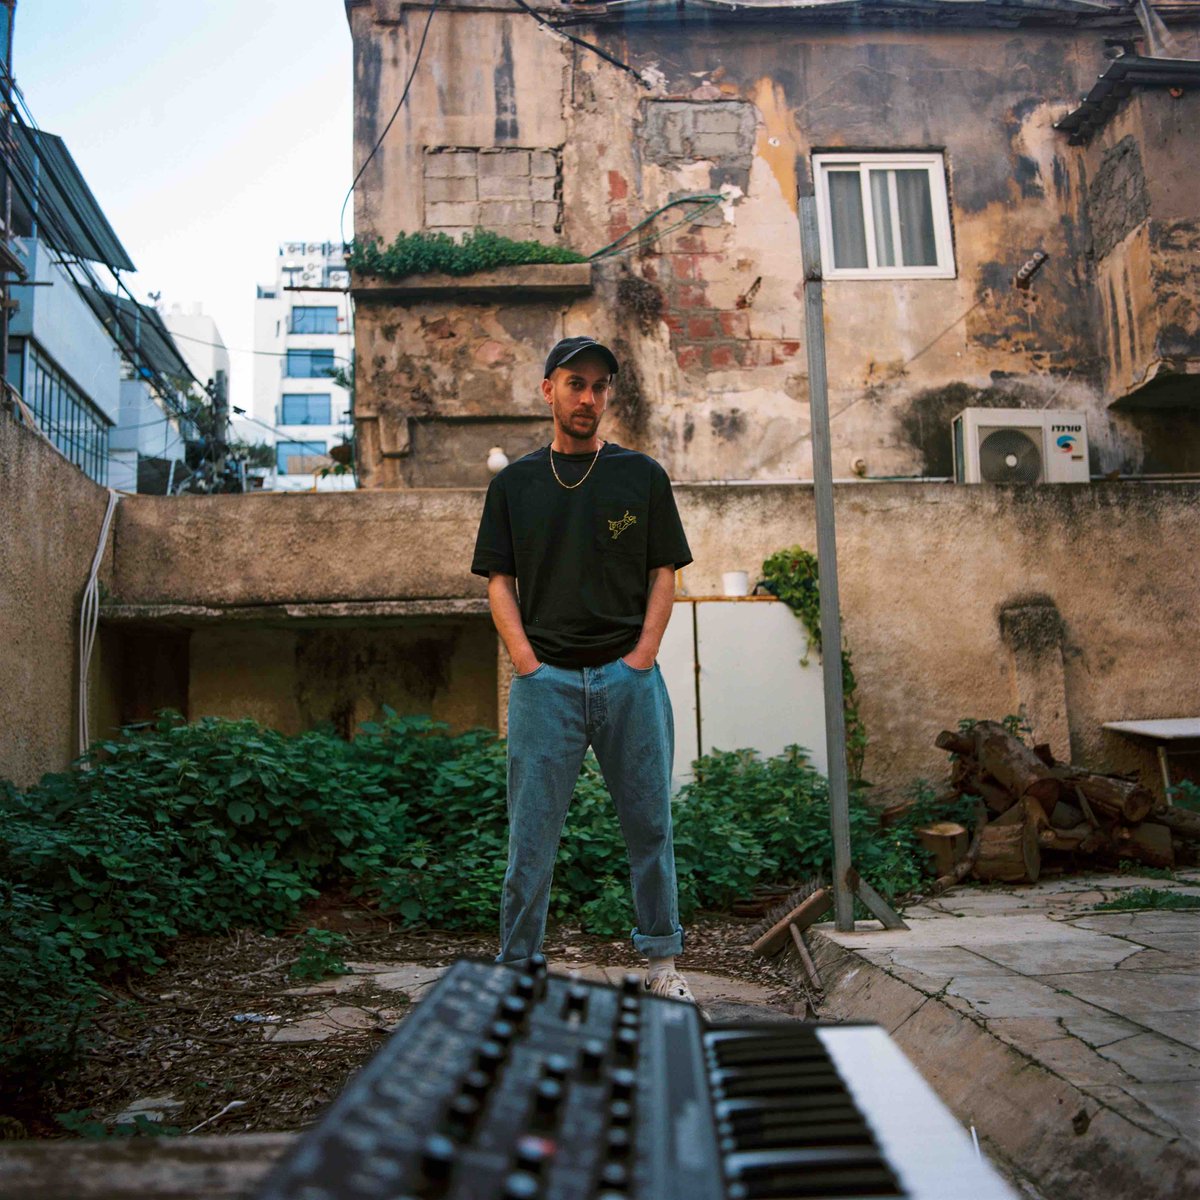 Today, fast-rising London-based keyboardist/producer @yonimayraz shares ‘1999’ the new single, a hypnotic ode to ‘90s hip hop, with live-rendered boom bap beats and wailing saxophones. orcd.co/YoniMayraz-1999